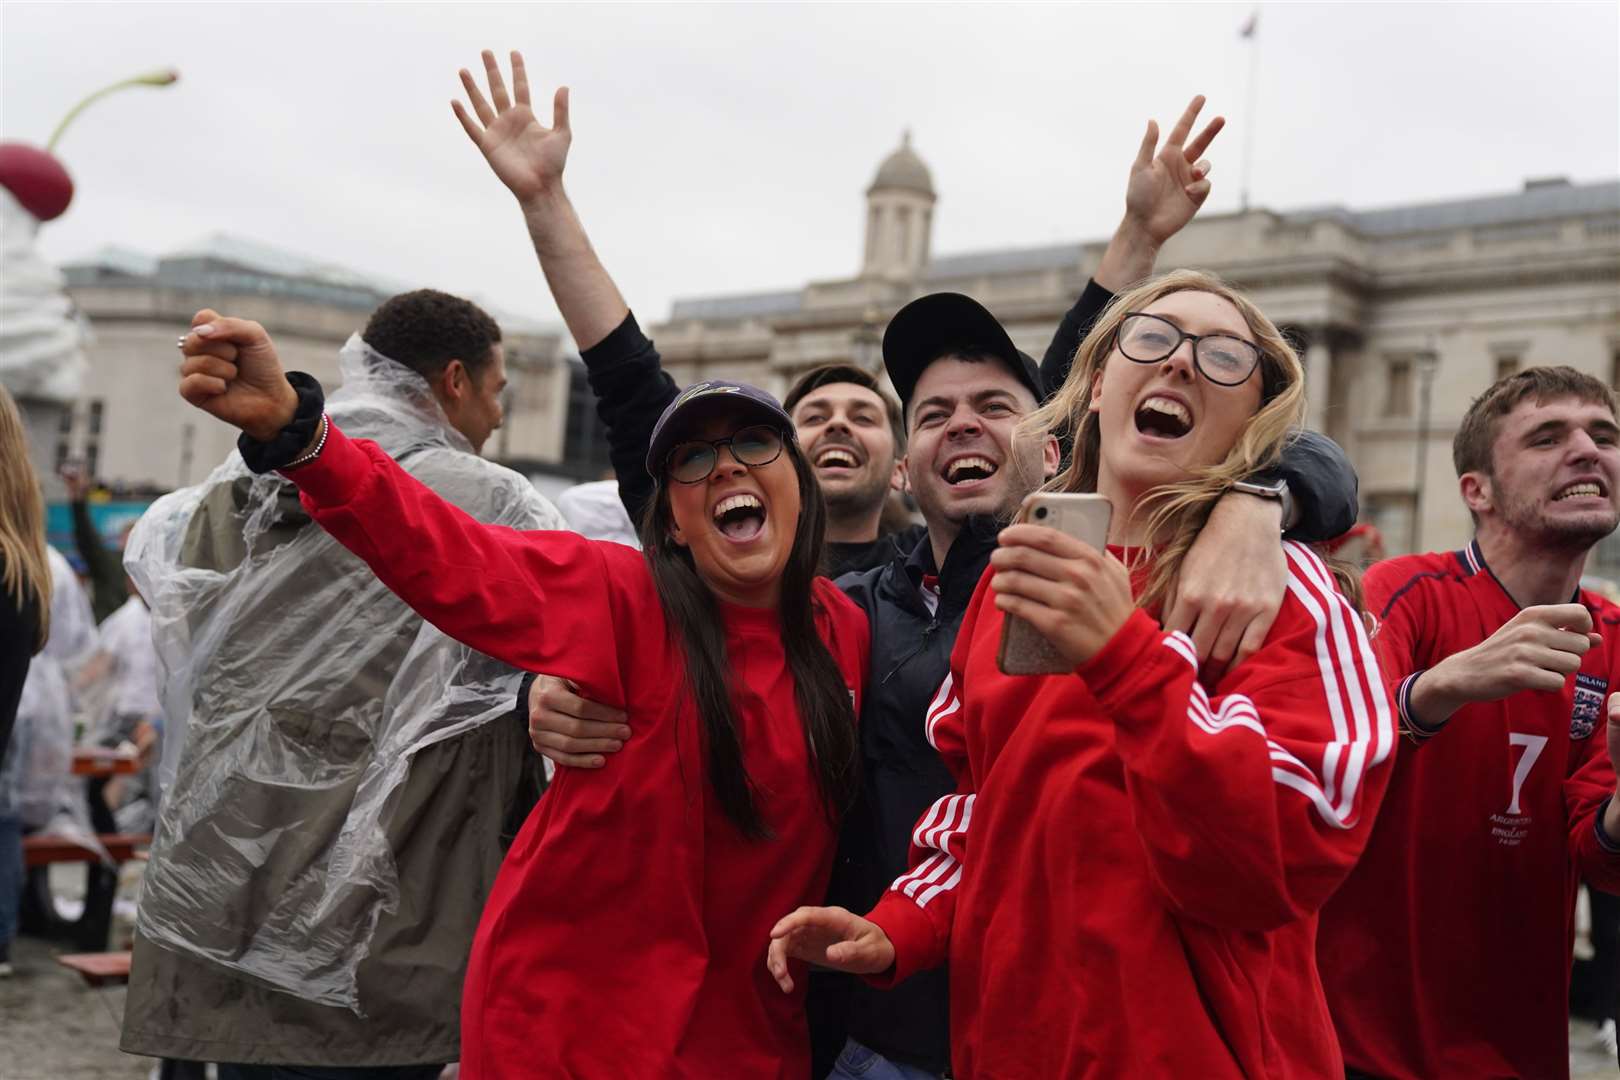 Fans watch the match in Trafalgar Square, central London (Victoria Jones/PA)